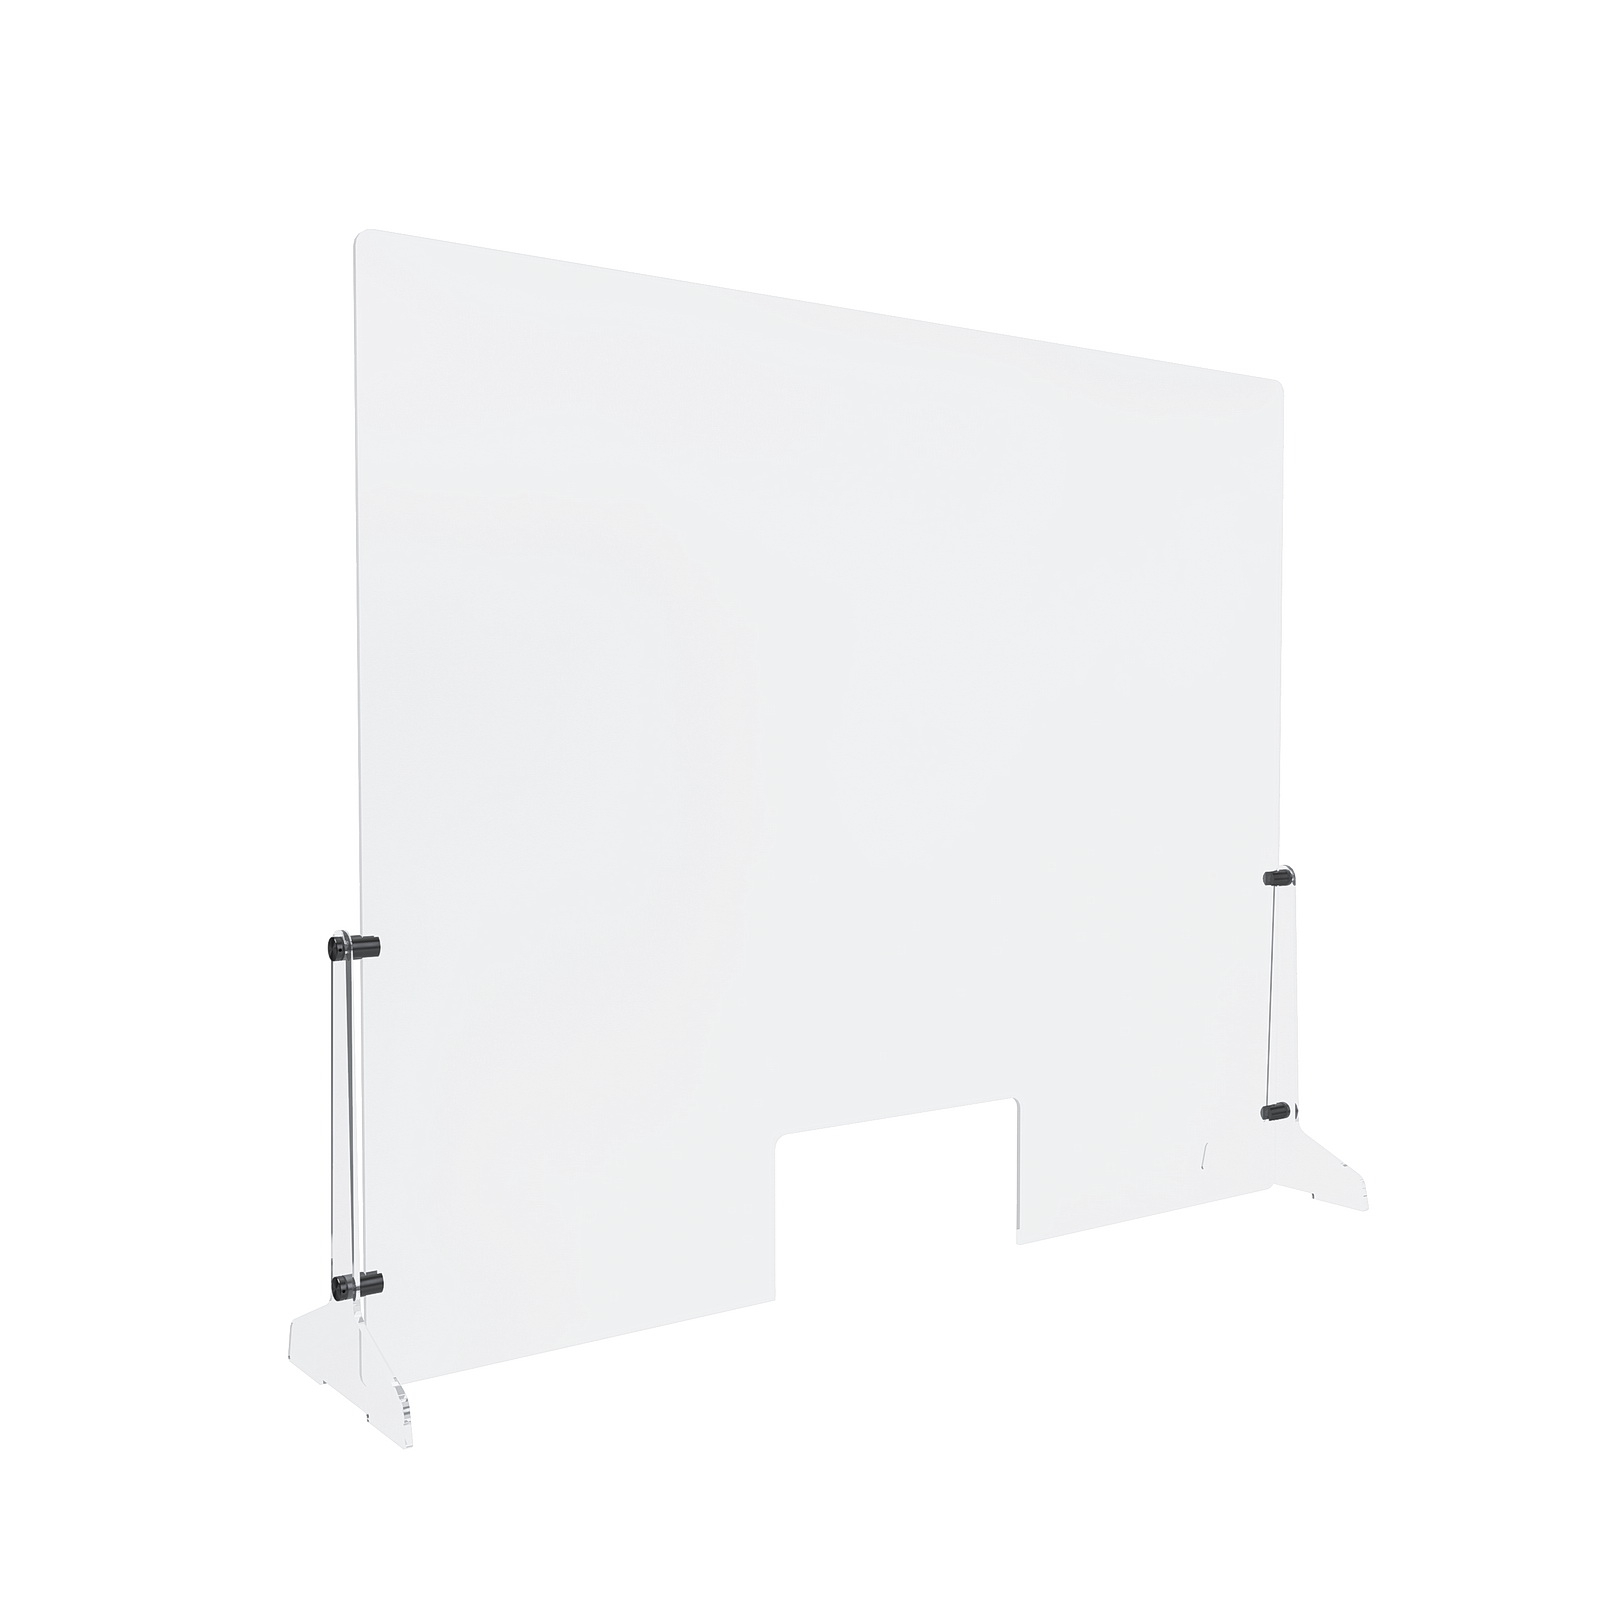 Clear Acrylic Sneeze Guard 36'' Wide x 30'' Tall (10'' x 5'' Cut Out), with (2) 7'' Wide x 12-5/16'' Deep Feet on the Side, and (4) Aluminum Black Anodized Forks / Standoffs.